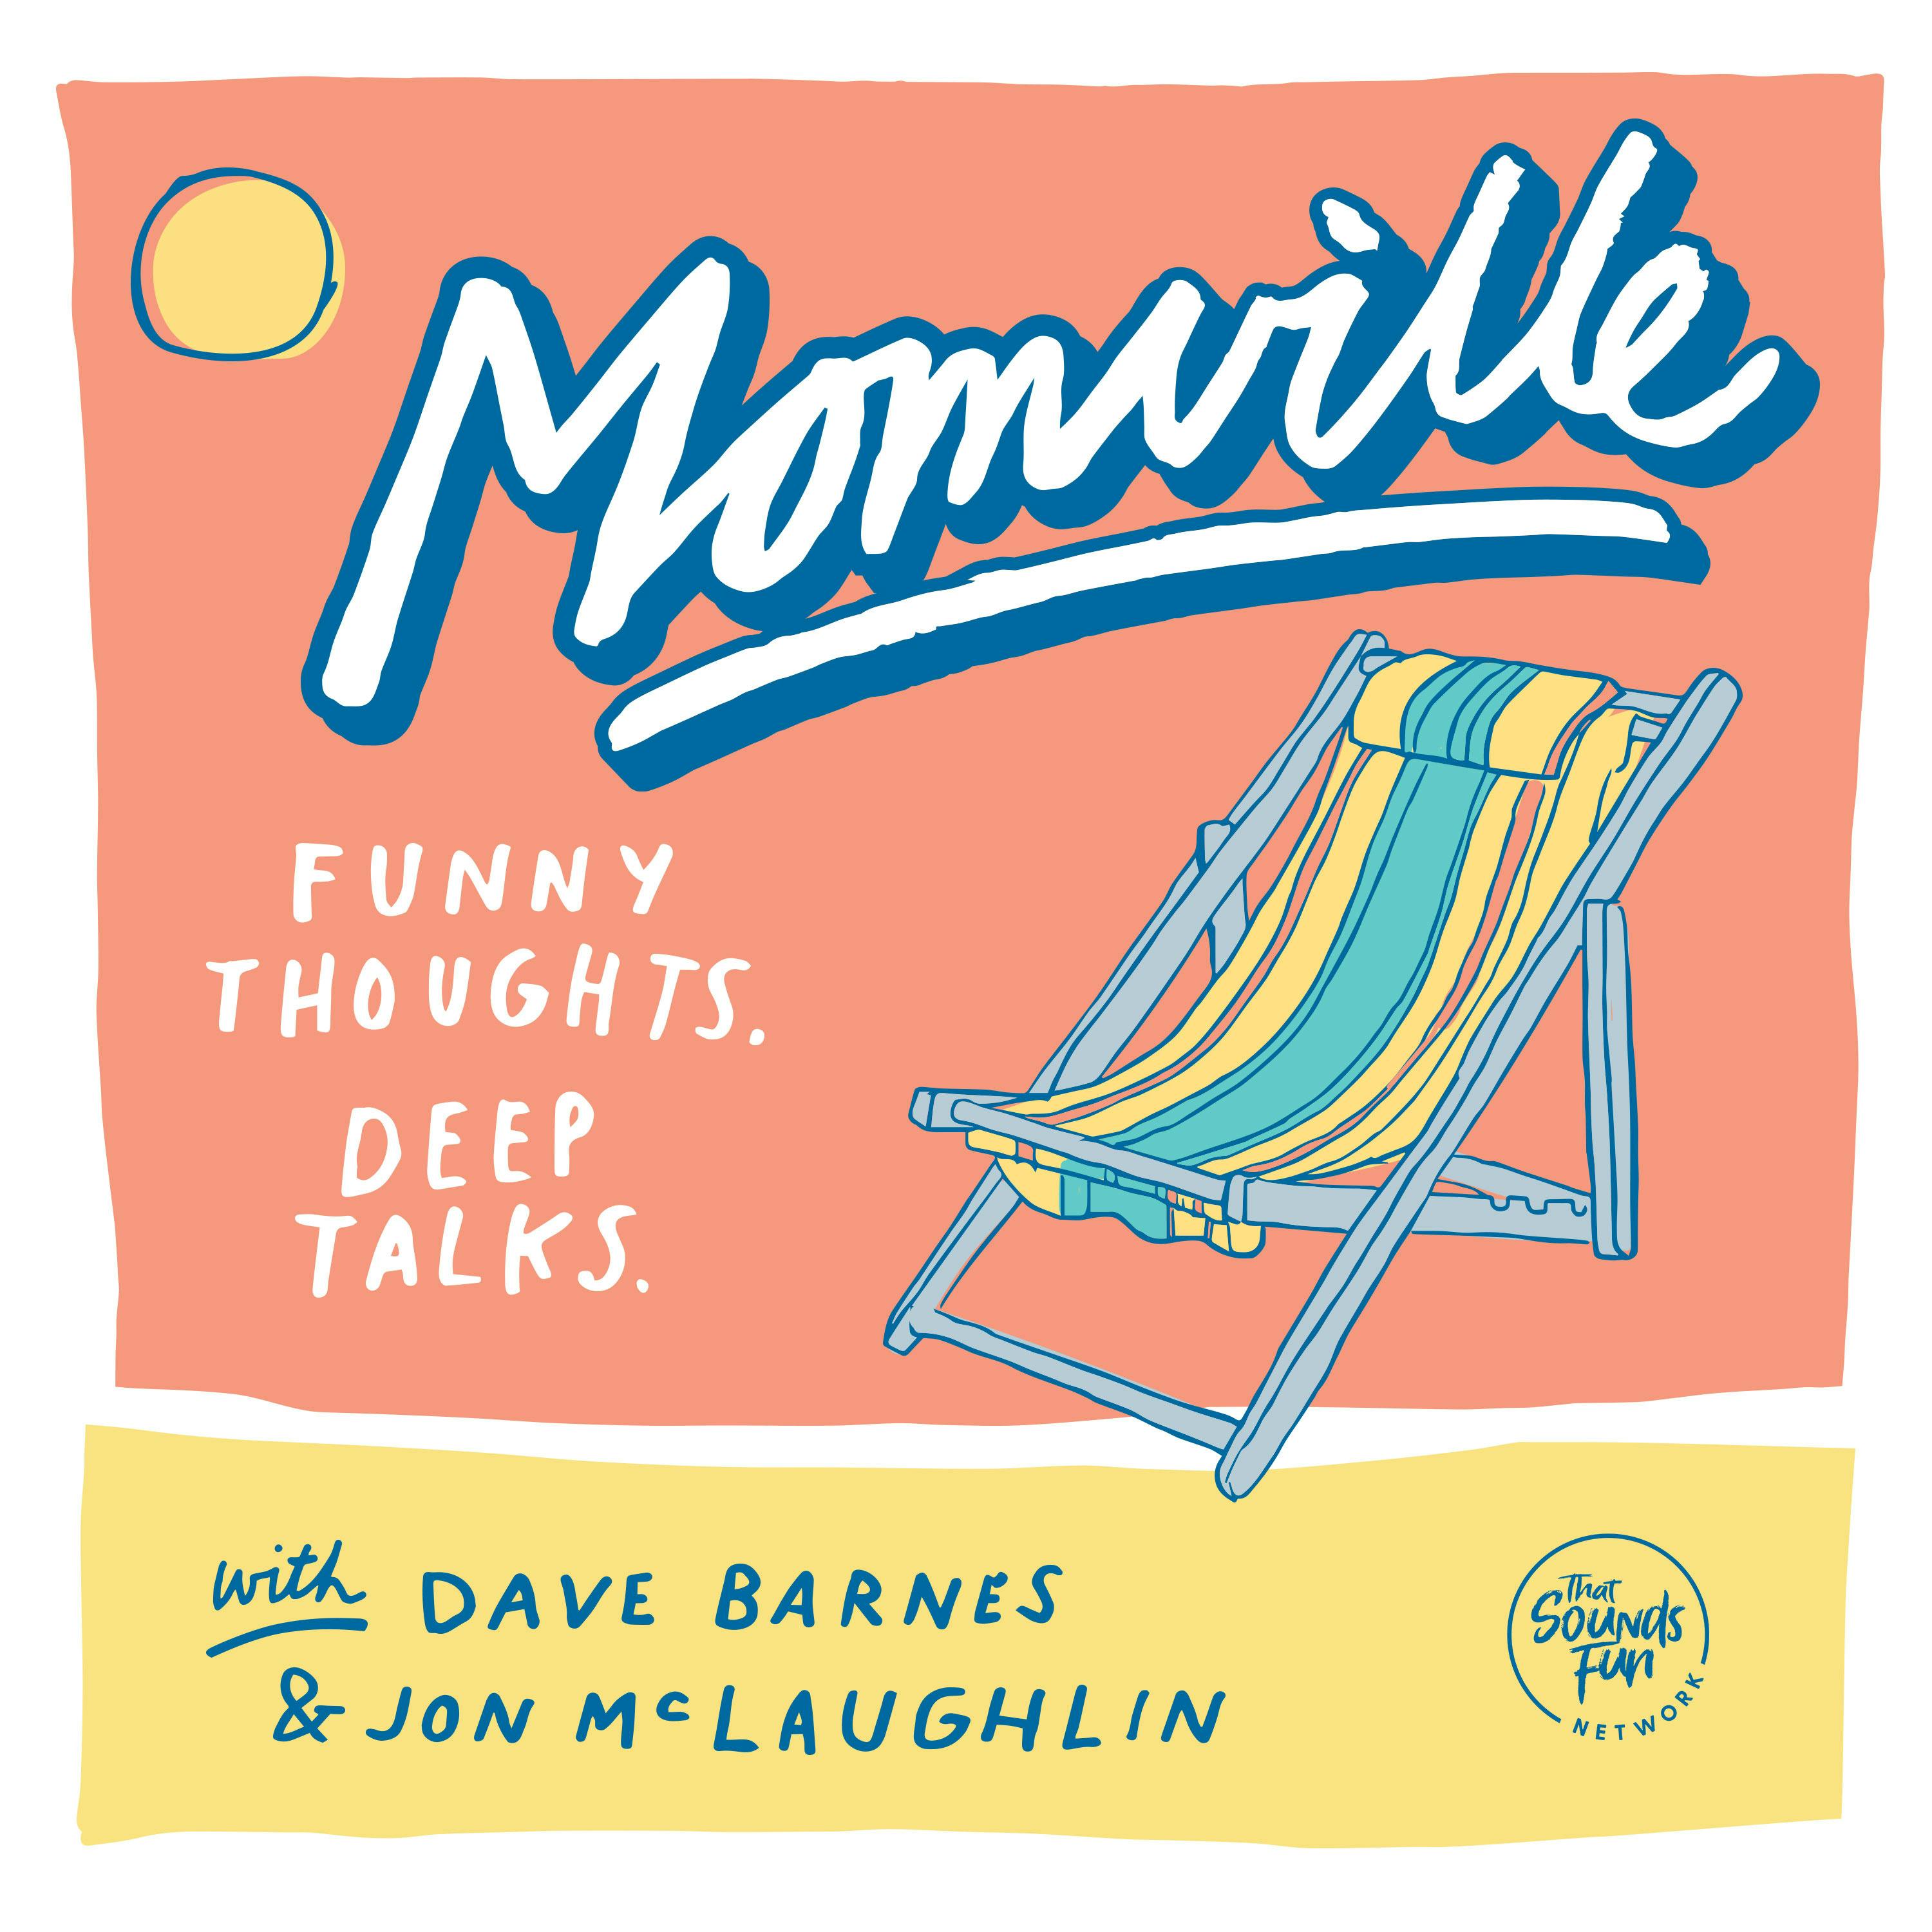 Welcome to Momville!